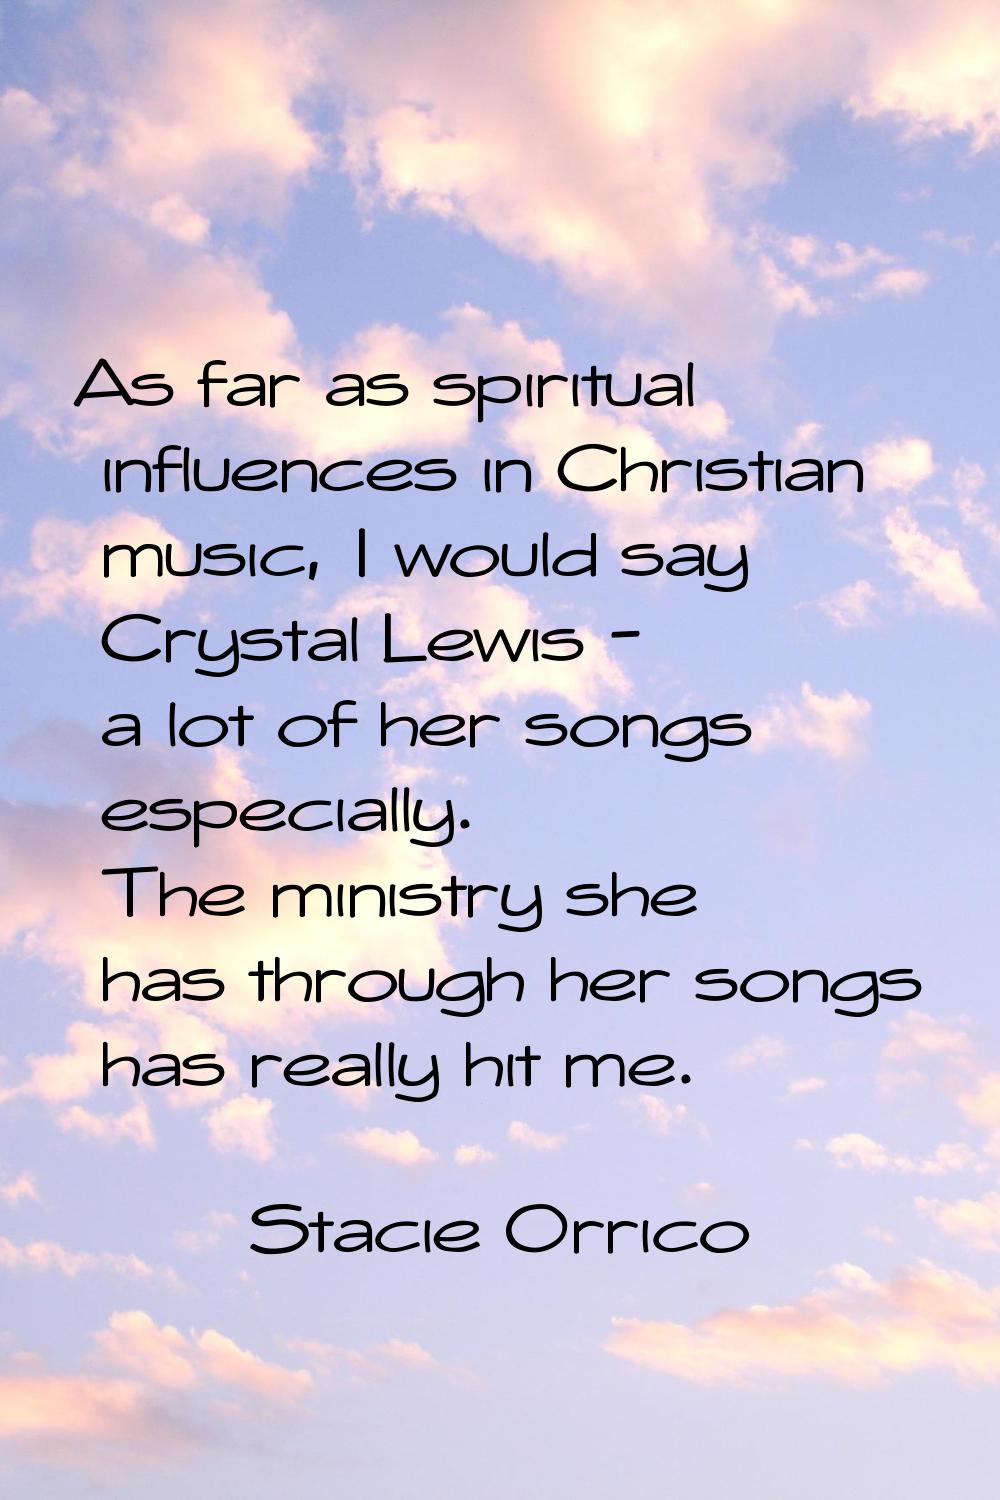 As far as spiritual influences in Christian music, I would say Crystal Lewis - a lot of her songs e